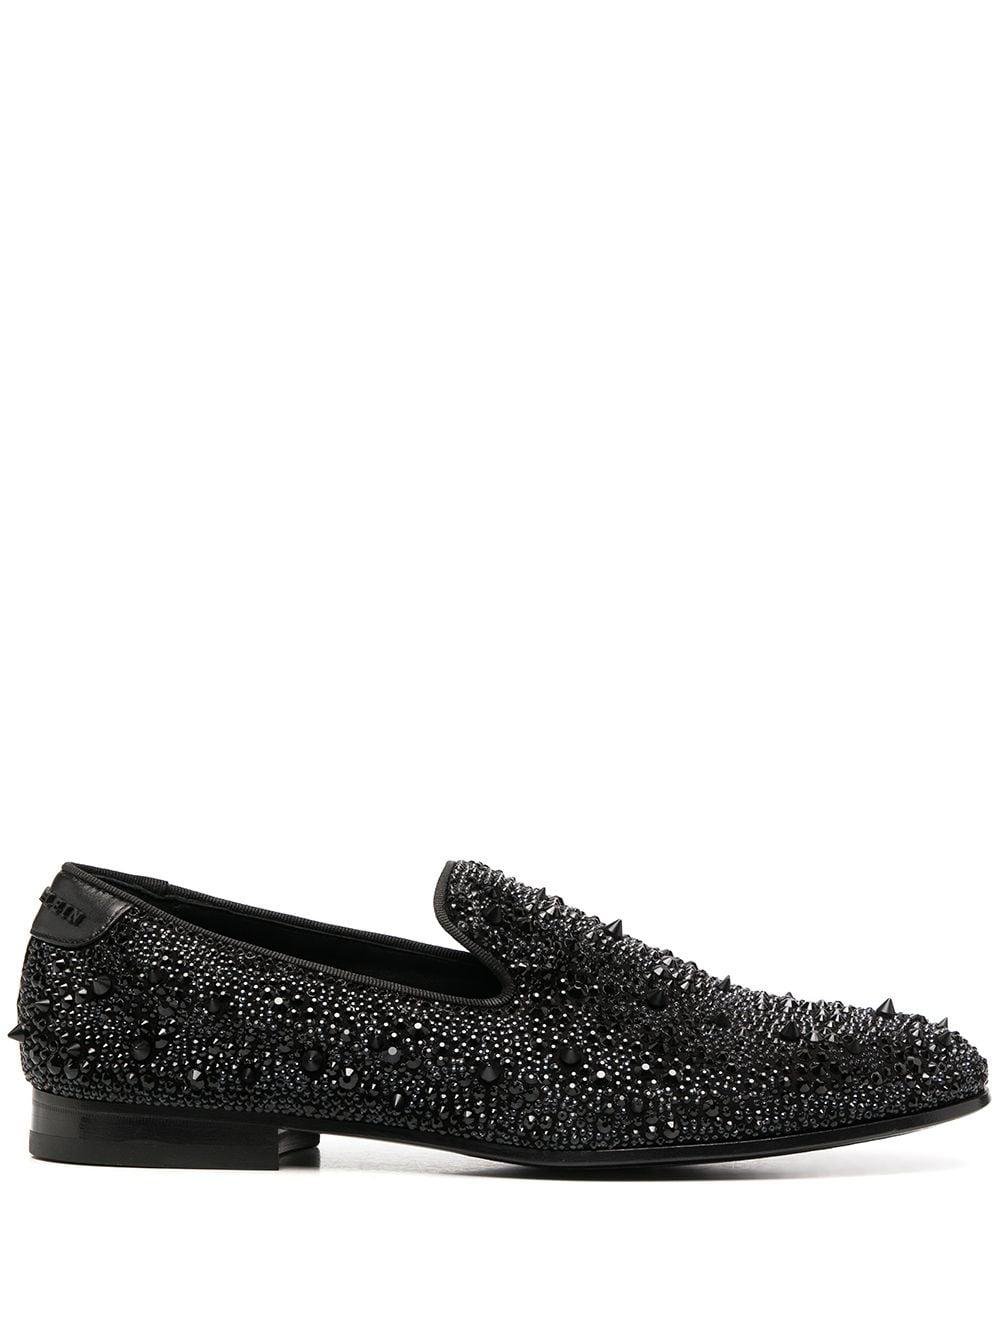 crystal-accented moccasins by PHILIPP PLEIN